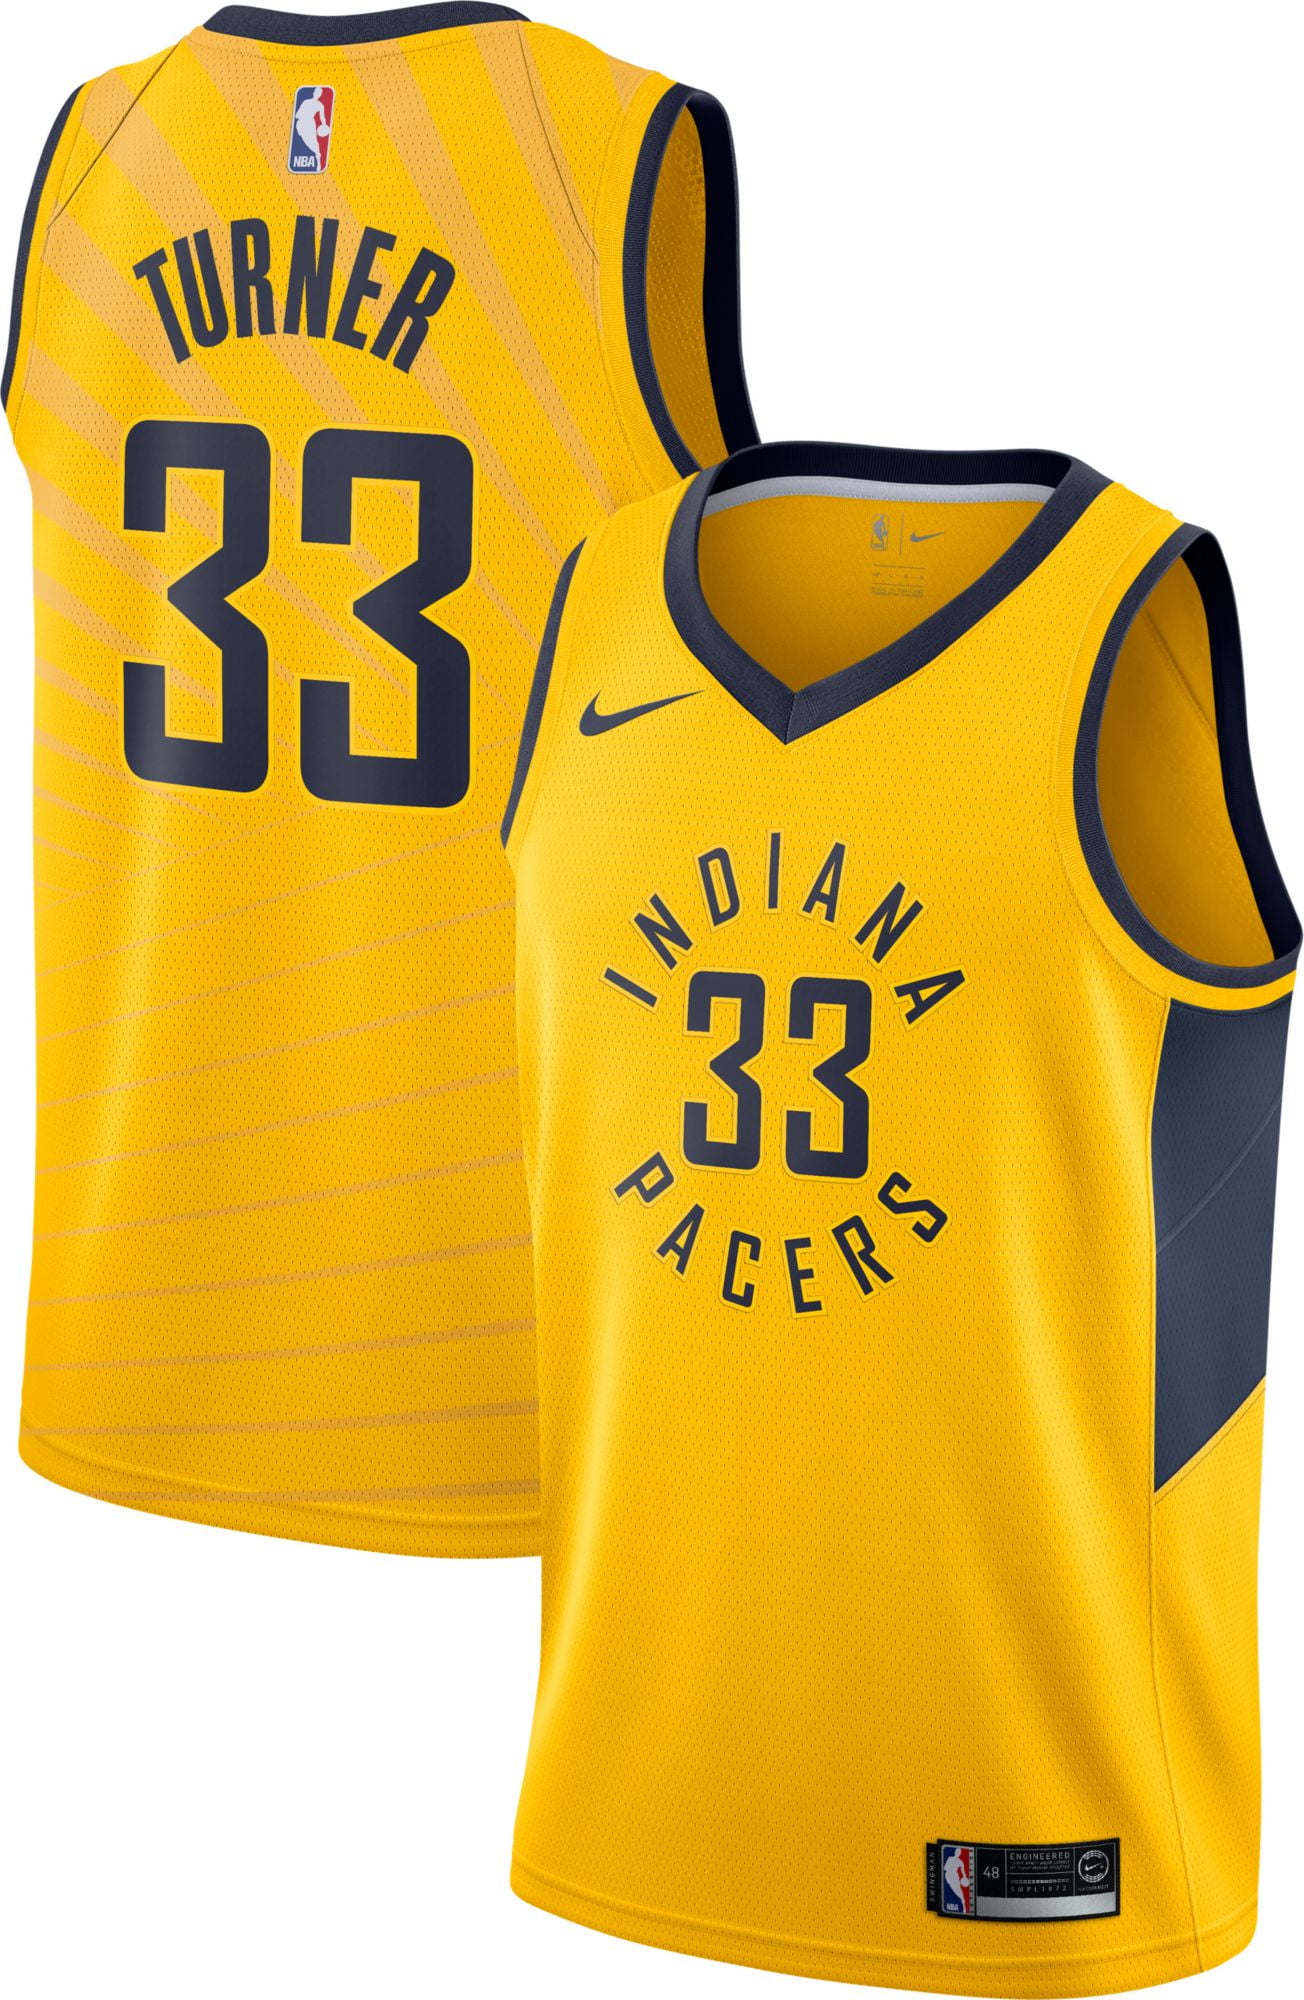 pacers new jersey